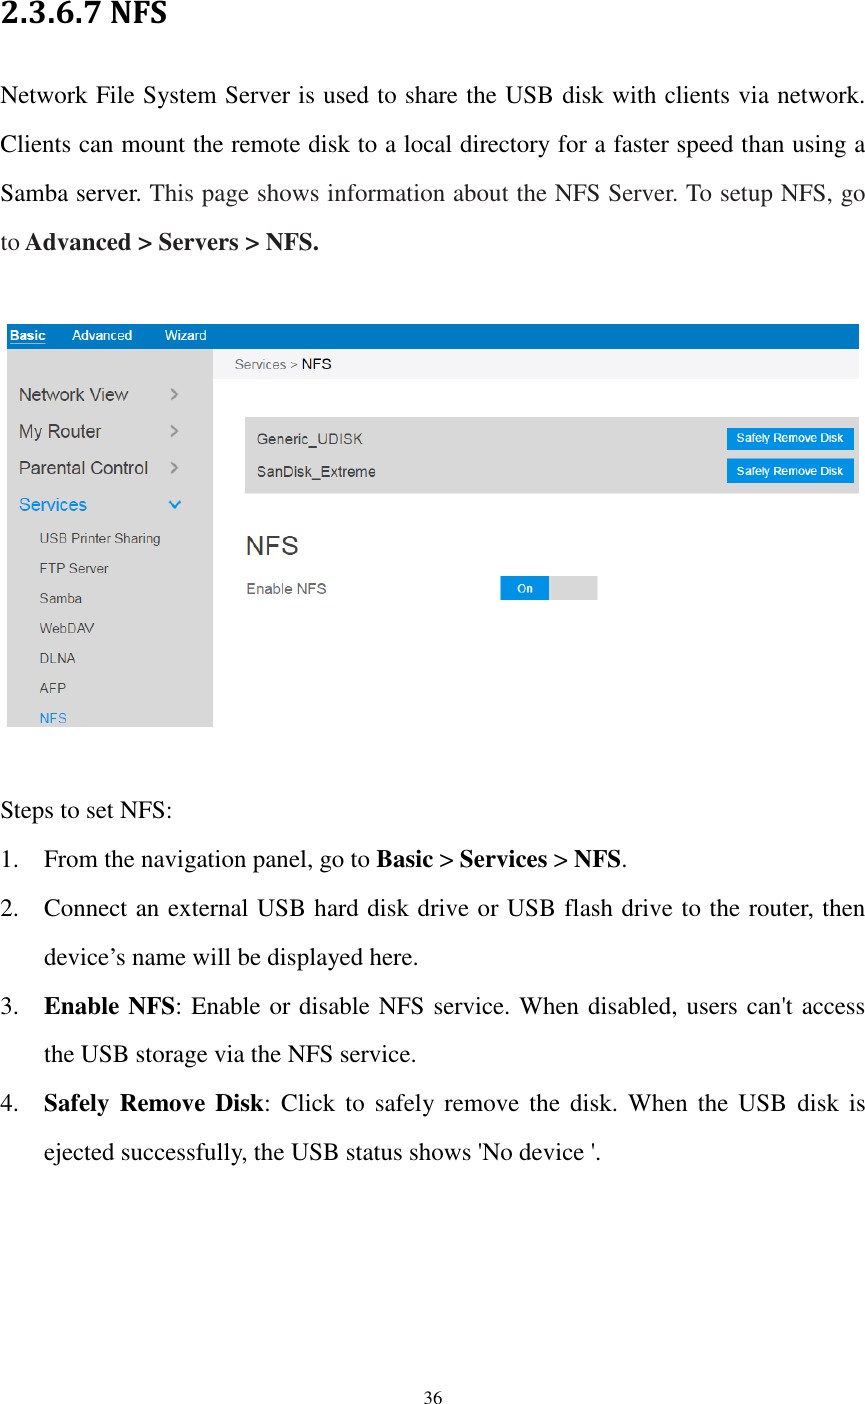  36  2.3.6.7 NFS Network File System Server is used to share the USB disk with clients via network. Clients can mount the remote disk to a local directory for a faster speed than using a Samba server. This page shows information about the NFS Server. To setup NFS, go to Advanced &gt; Servers &gt; NFS.    Steps to set NFS: 1. From the navigation panel, go to Basic &gt; Services &gt; NFS. 2. Connect an external USB hard disk drive or USB flash drive to the router, then device’s name will be displayed here. 3. Enable NFS: Enable or disable NFS service. When disabled, users can&apos;t access the USB storage via the NFS service. 4. Safely Remove Disk:  Click  to  safely remove  the disk.  When  the  USB  disk is ejected successfully, the USB status shows &apos;No device &apos;. 